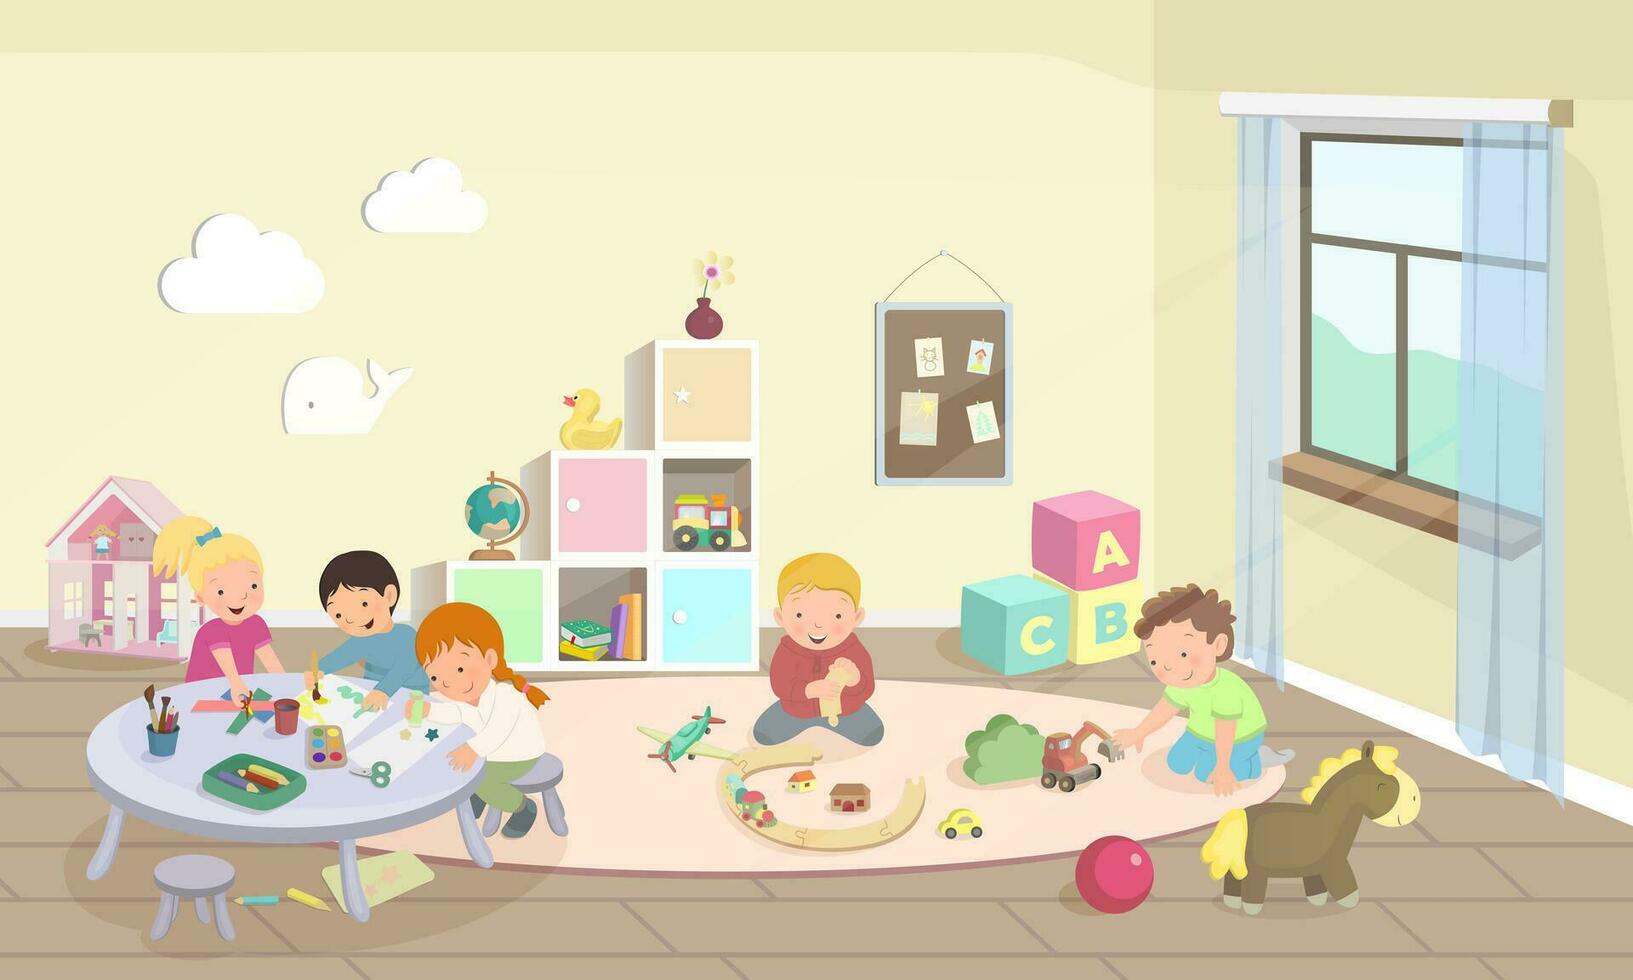 Kindergarten or preschool activities. Children playing with cars, drawing and make crafts. Cartoon bundle, vector illustration. Modern room with furniture, sunlight from window.